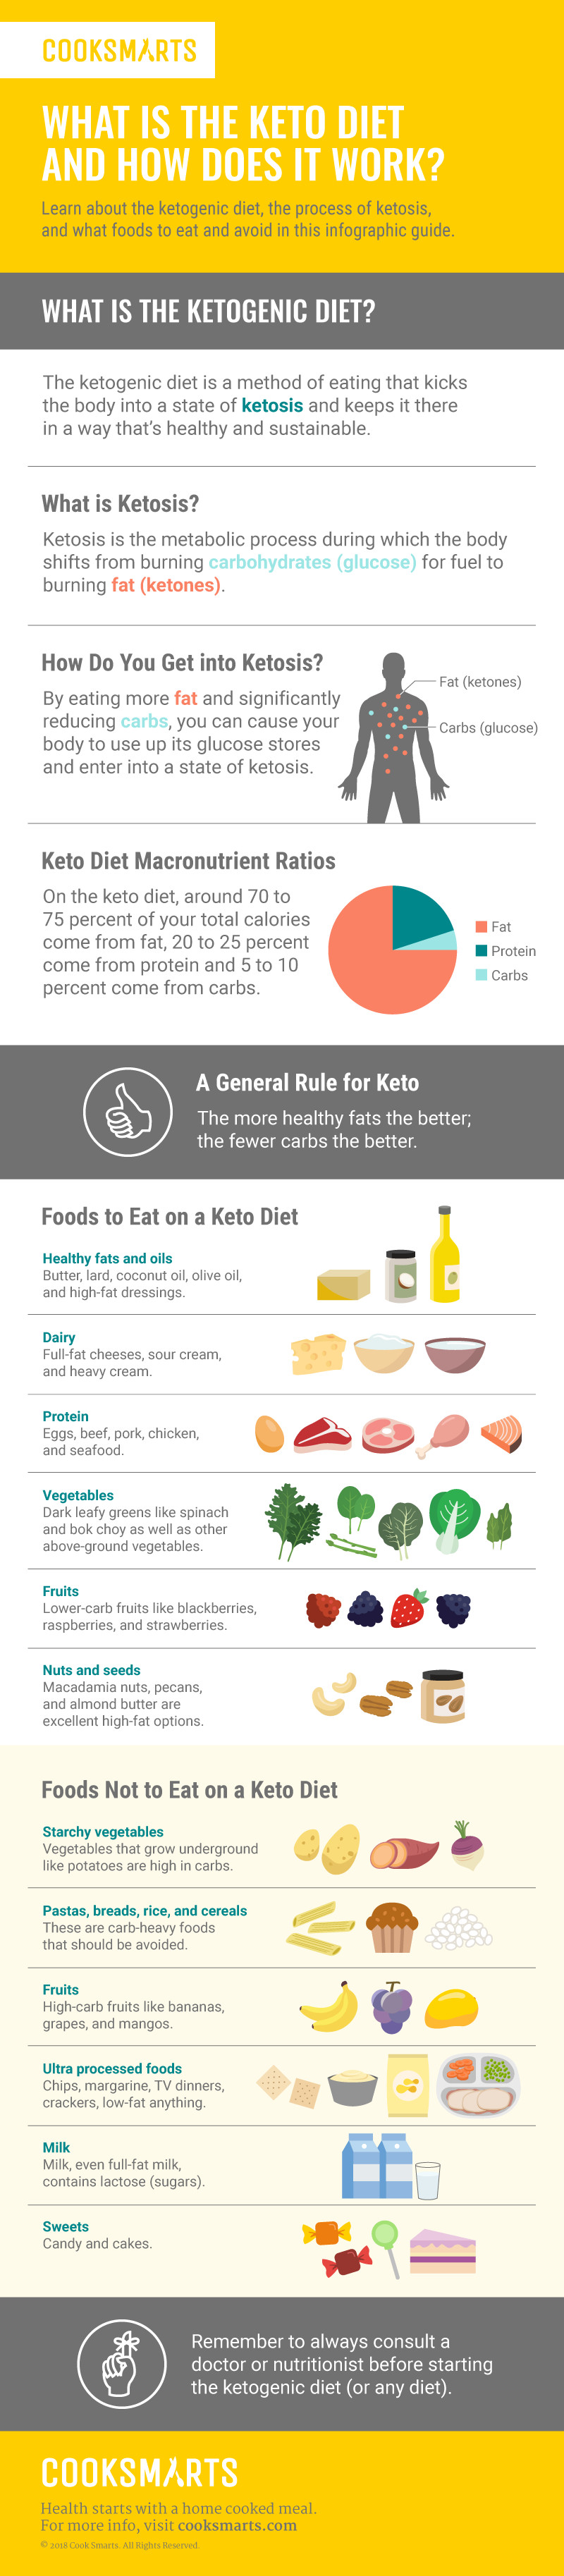 Why Does The Keto Diet Work
 What is the Keto Diet and How Does it Work [Infographic